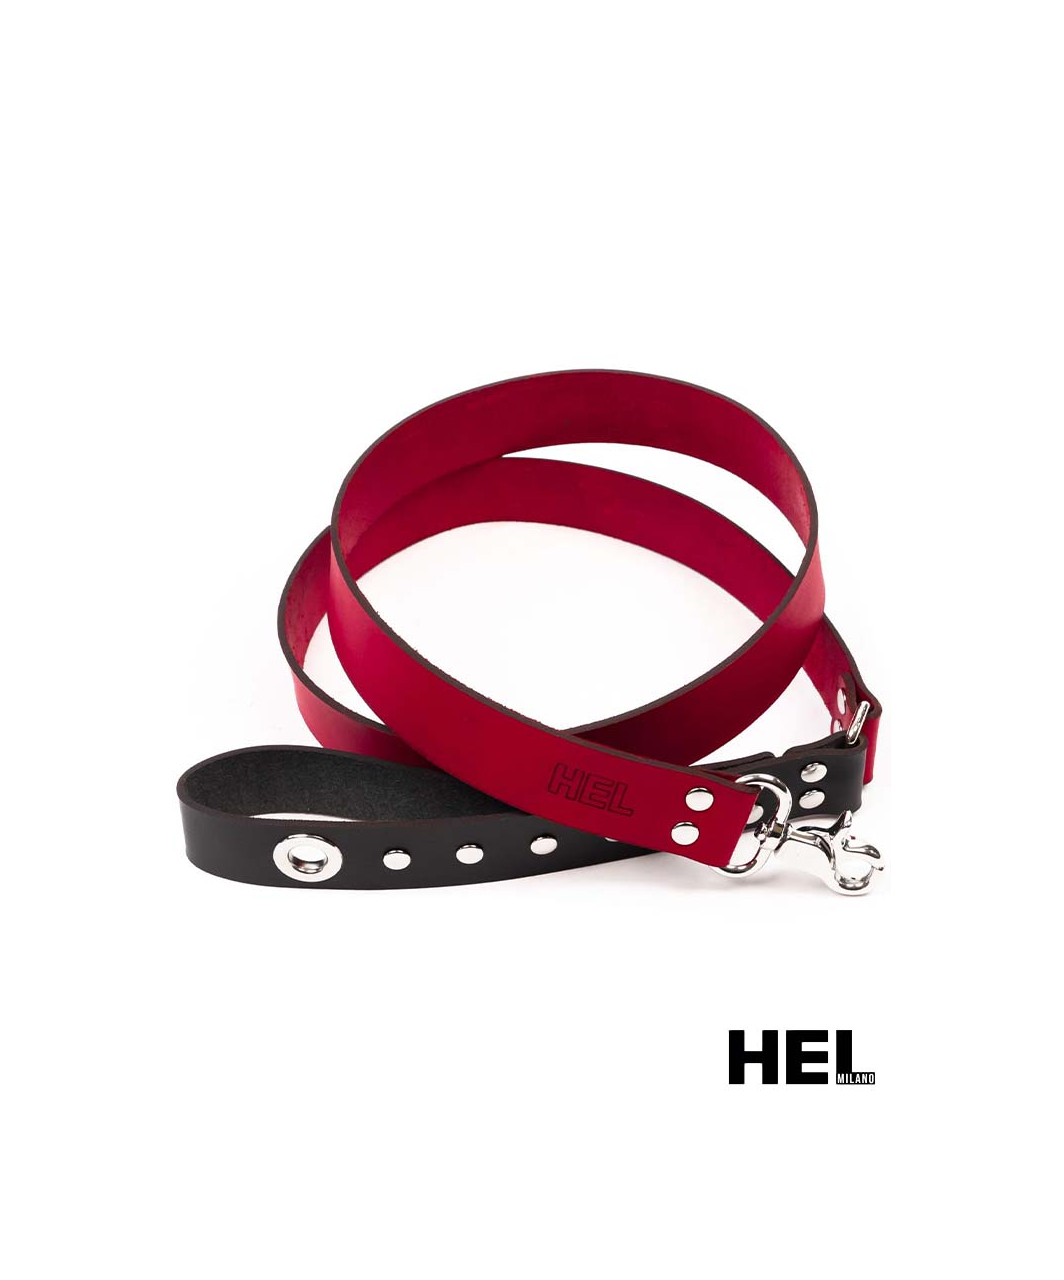 HEL Milano Leather Leash with Rivet on the Handle